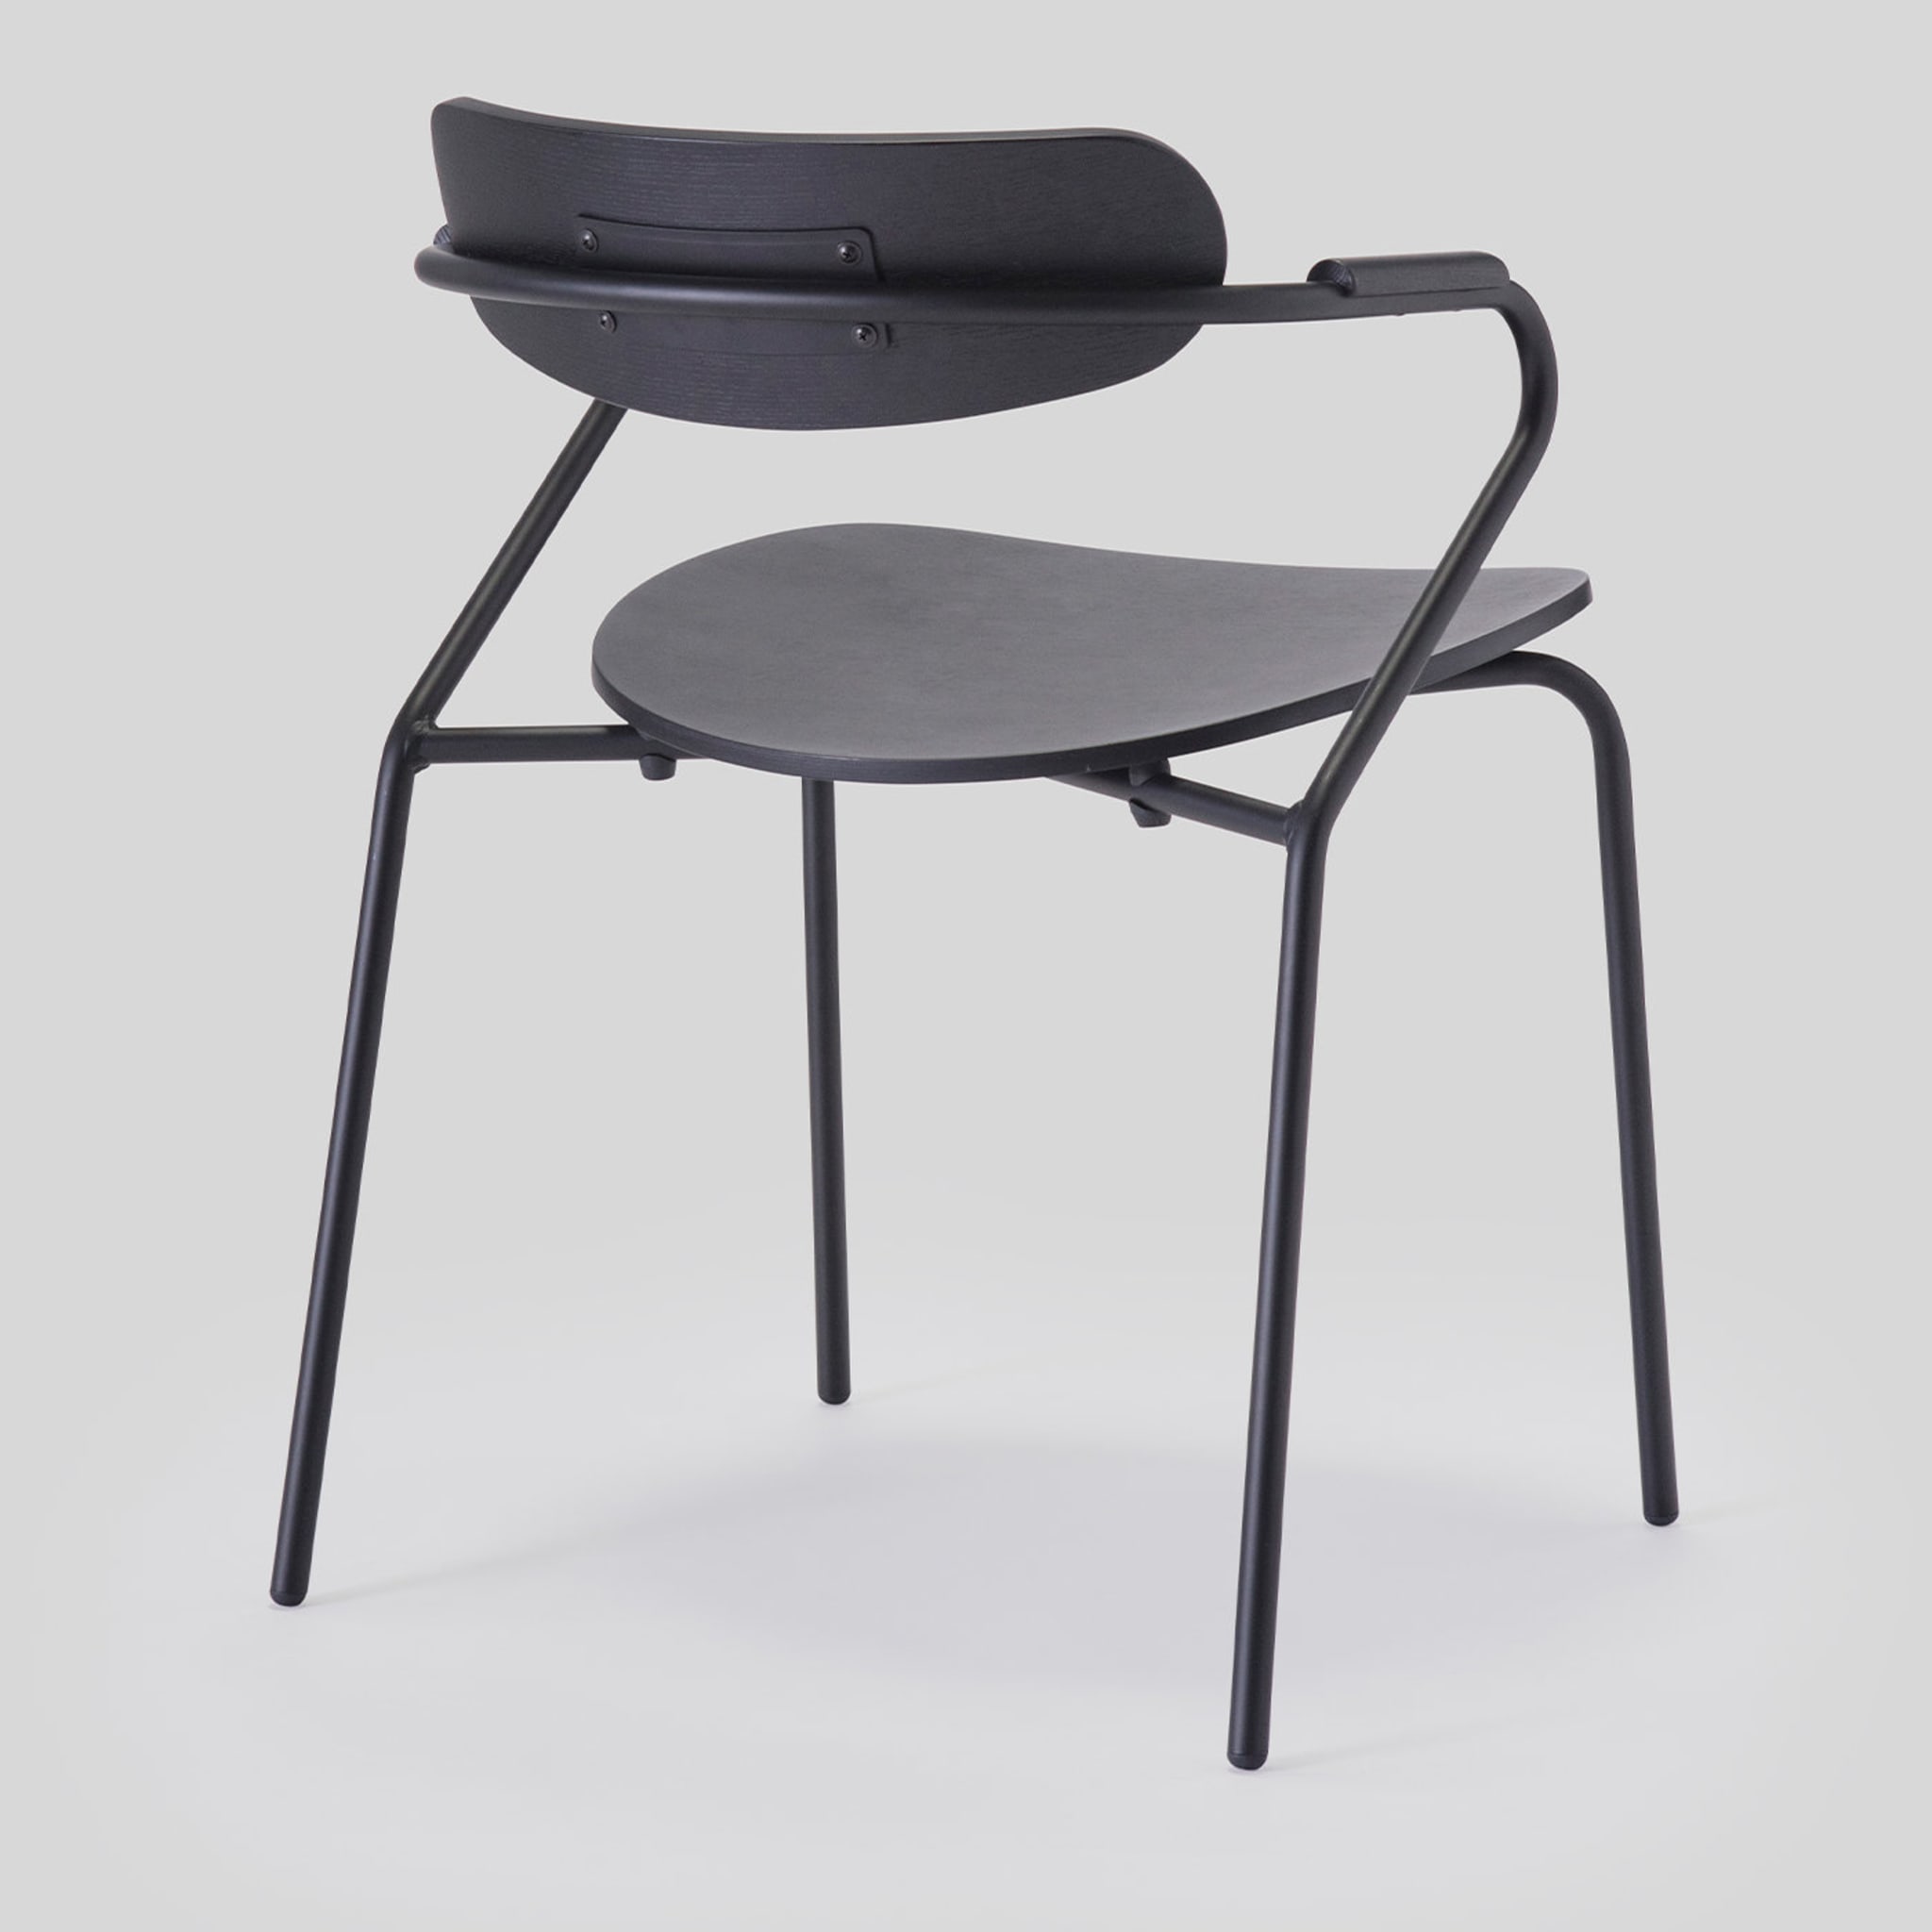 Linea Black Chair with Armrests - Alternative view 4